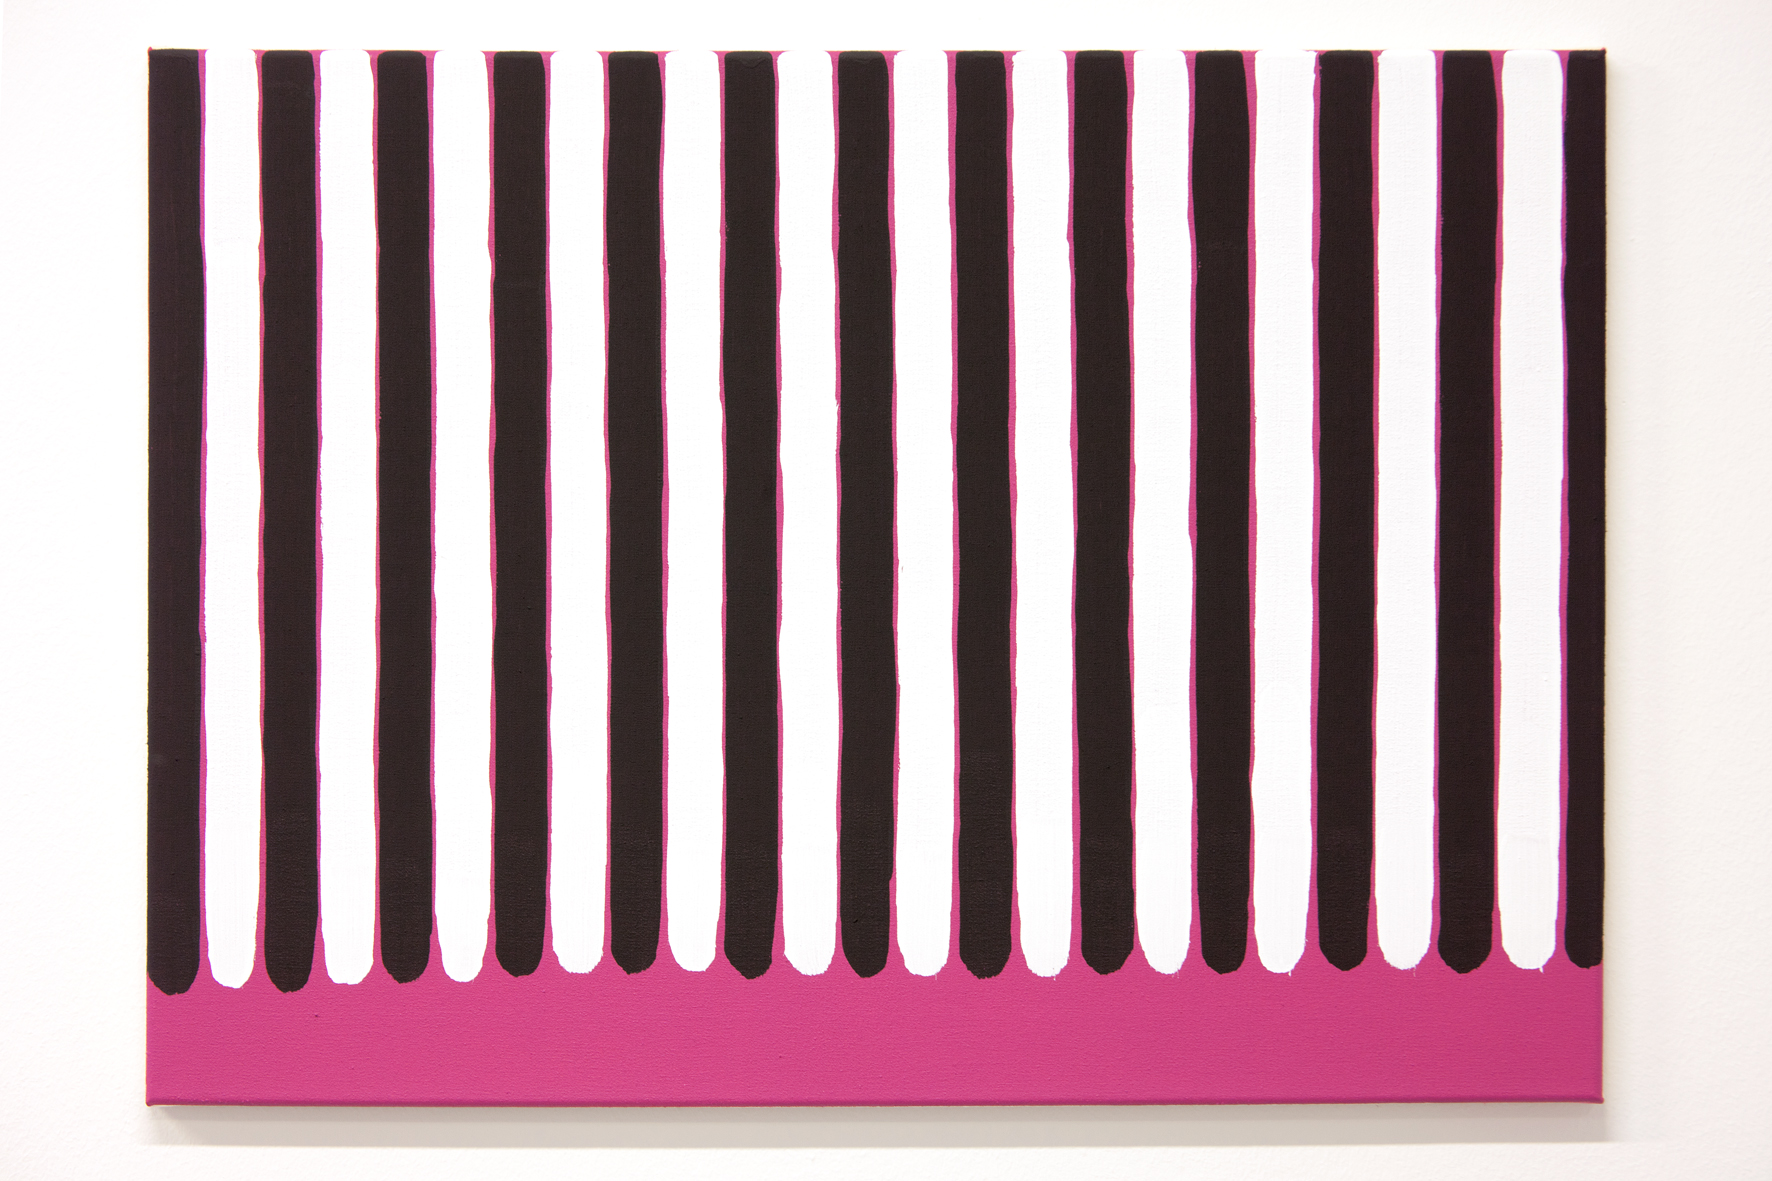 Holger Endres, 01 Magenta Schwarz Weiss (Tag 5), 2012, acrylic on cotton, 50 x 70 cm